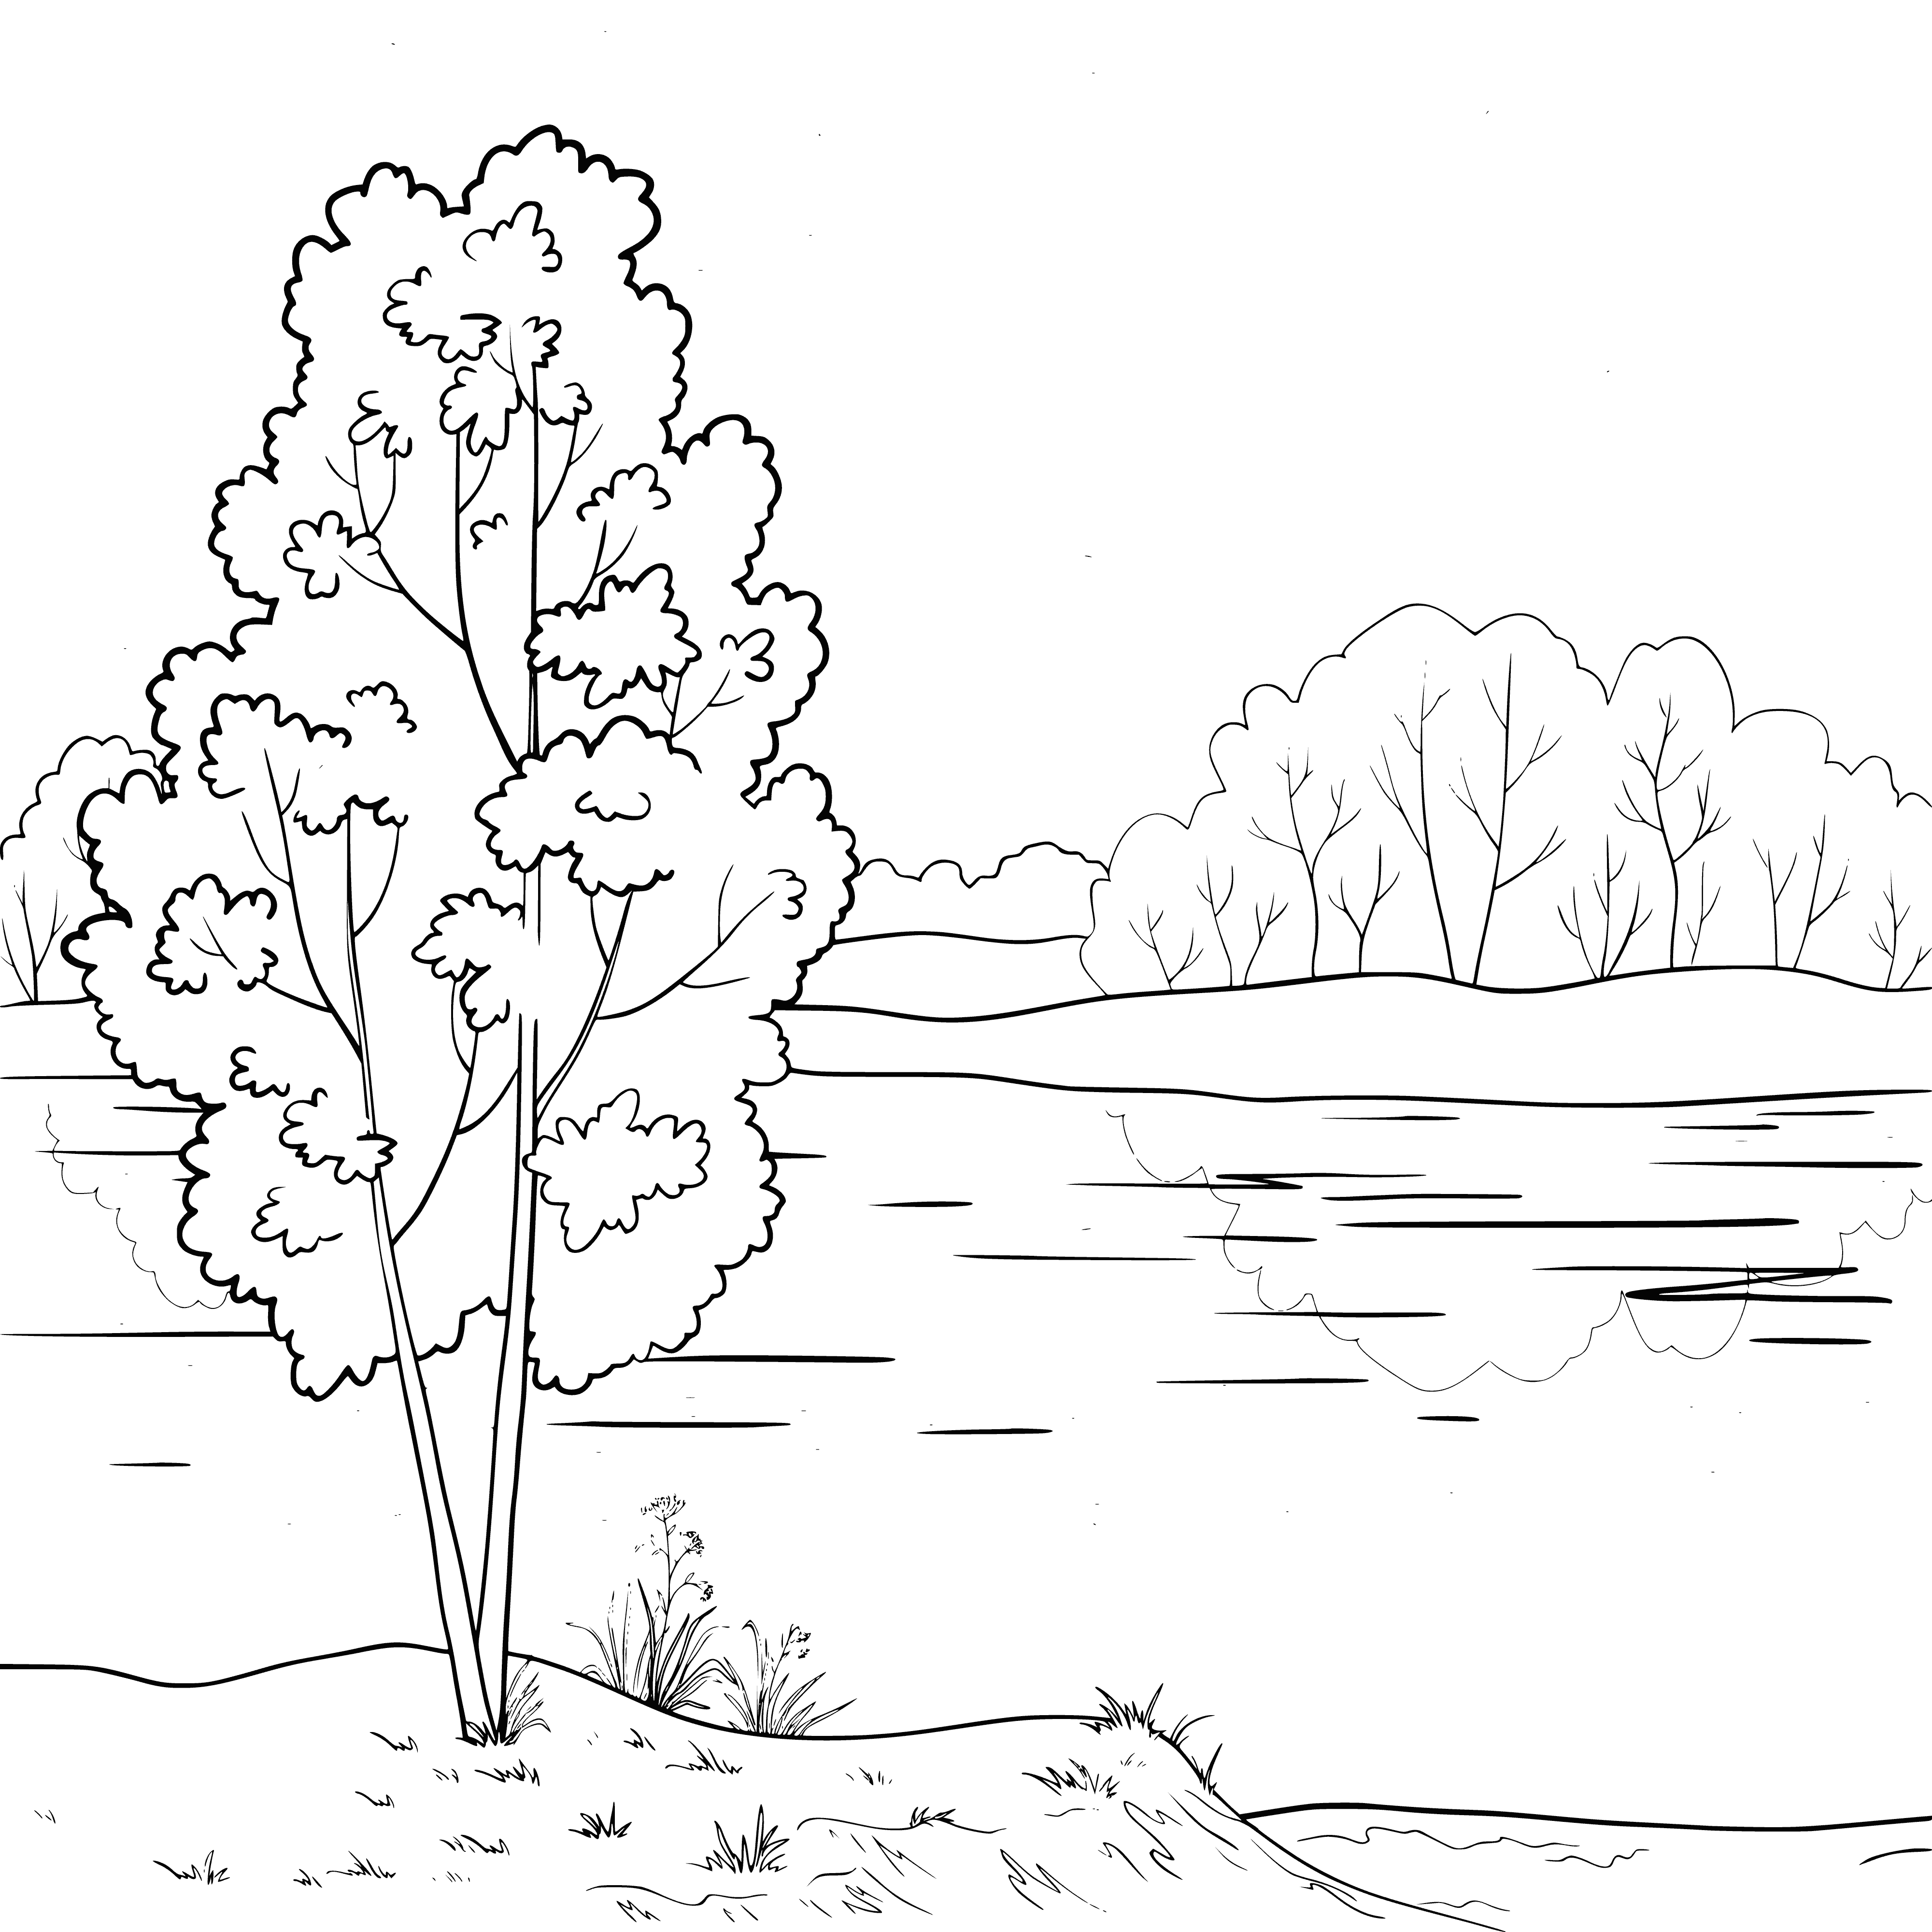 coloring page: River w/ cliffs on both sides & trees on banks & cliffs. Focused on the river in the middle of the landscape. #Landscape #River #Cliffs #Trees